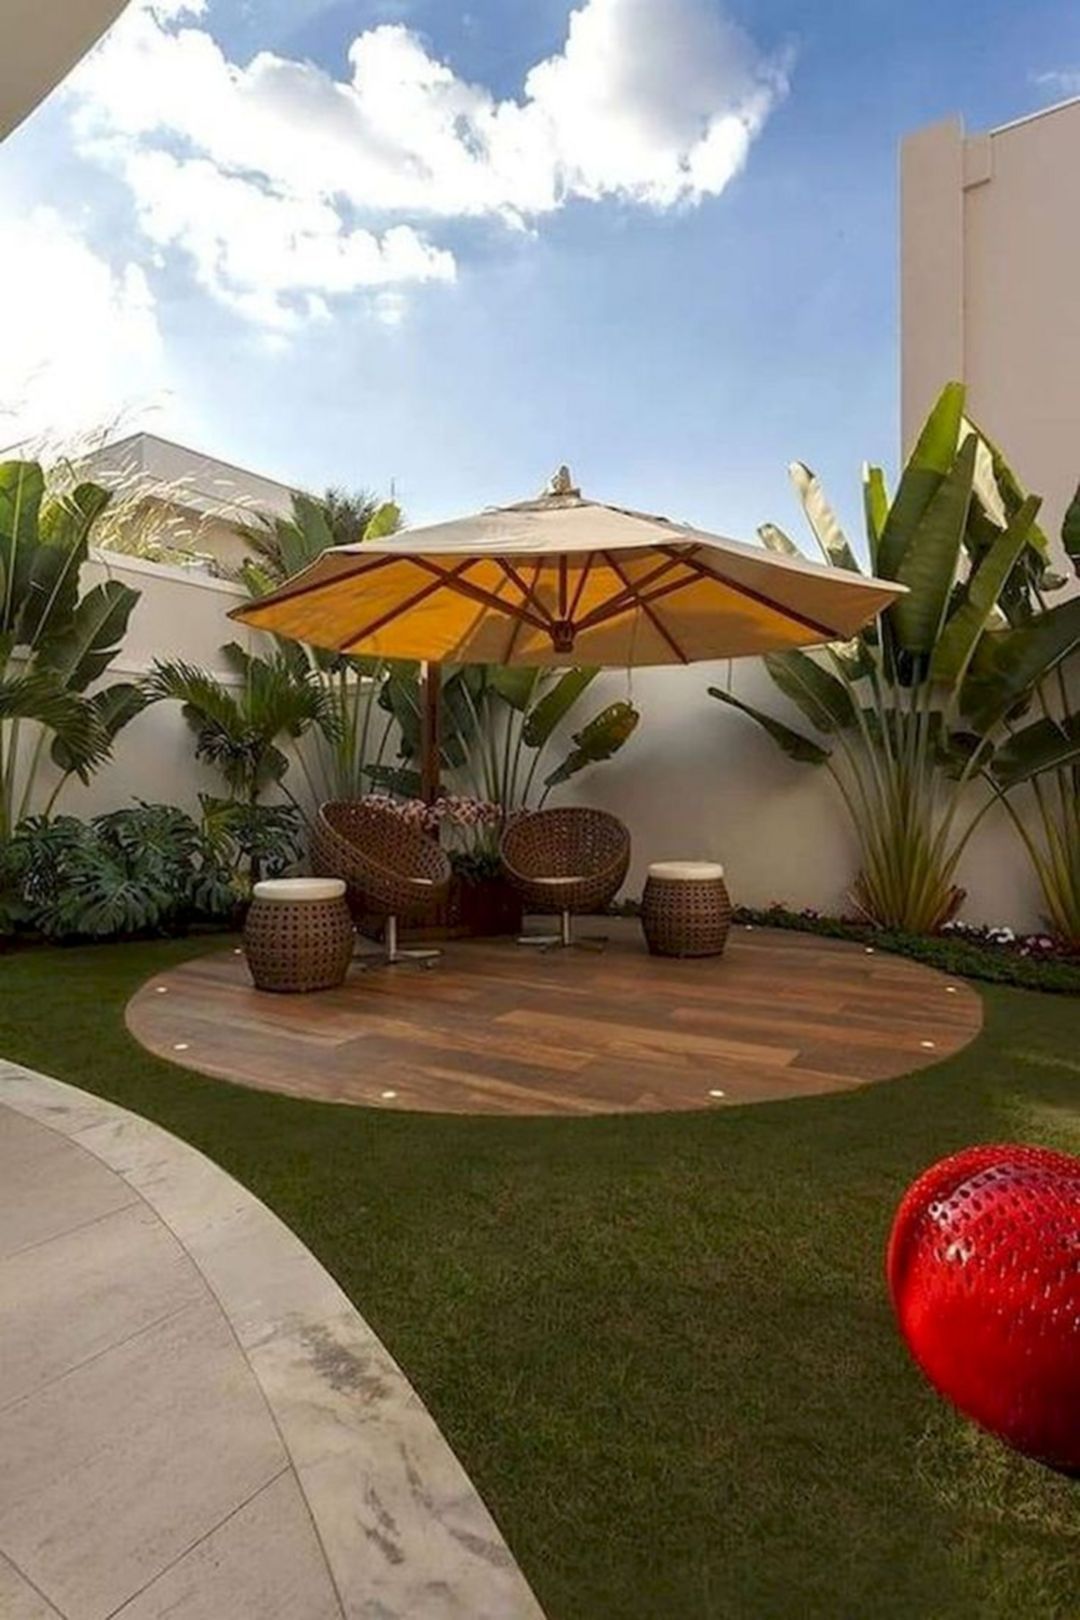 11 Ideal Small Garden Designs for Inspiring Your Home Yard